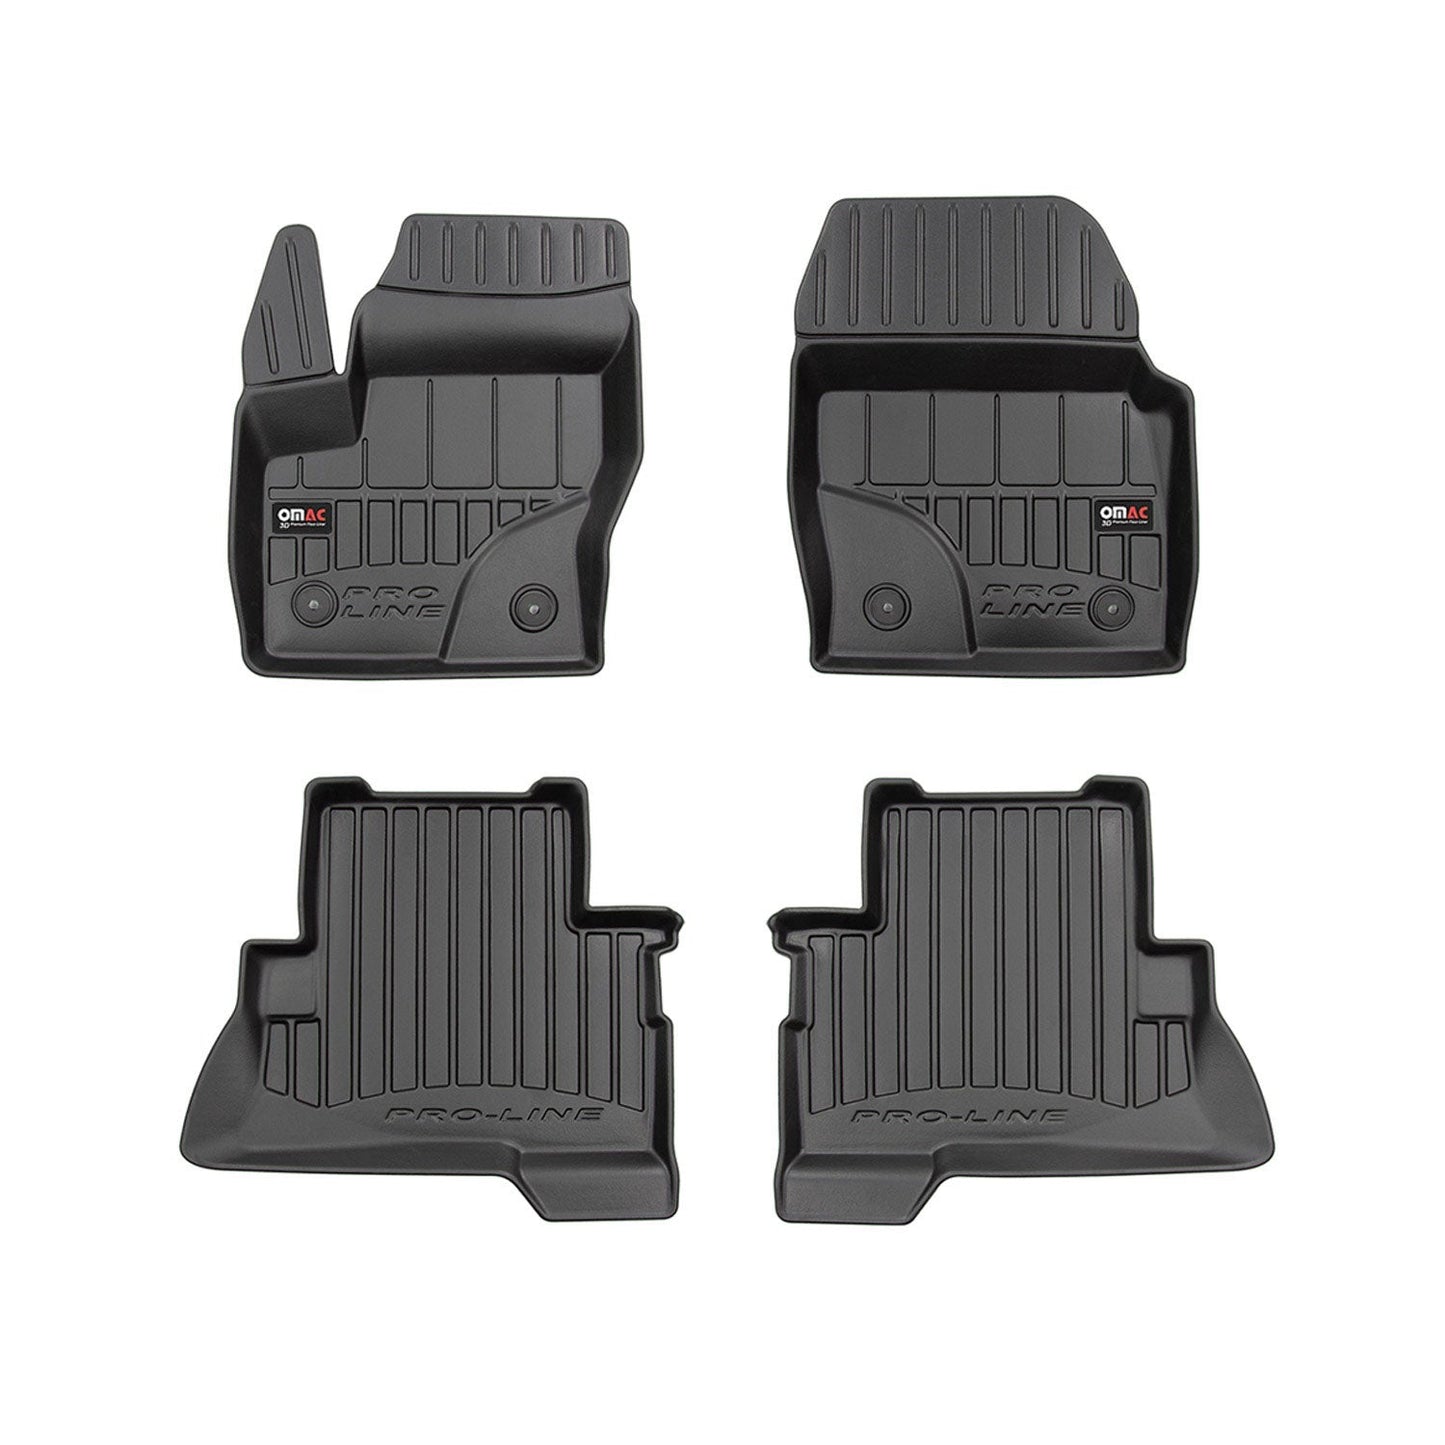 OMAC OMAC Premium Floor Mats for Ford Escape 2013-2019 All-Weather Heavy Duty 4x '2616454